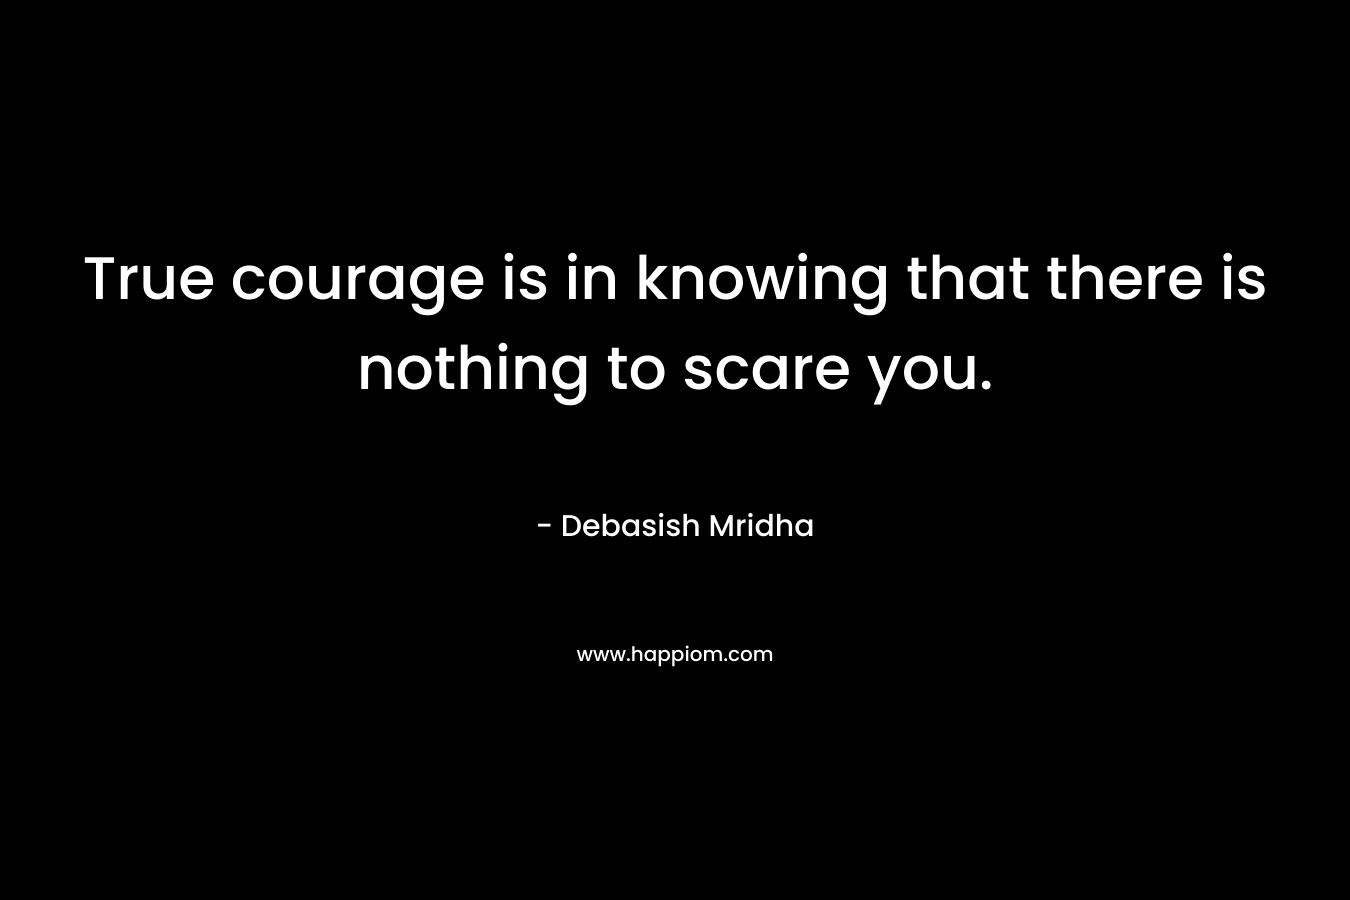 True courage is in knowing that there is nothing to scare you. – Debasish Mridha